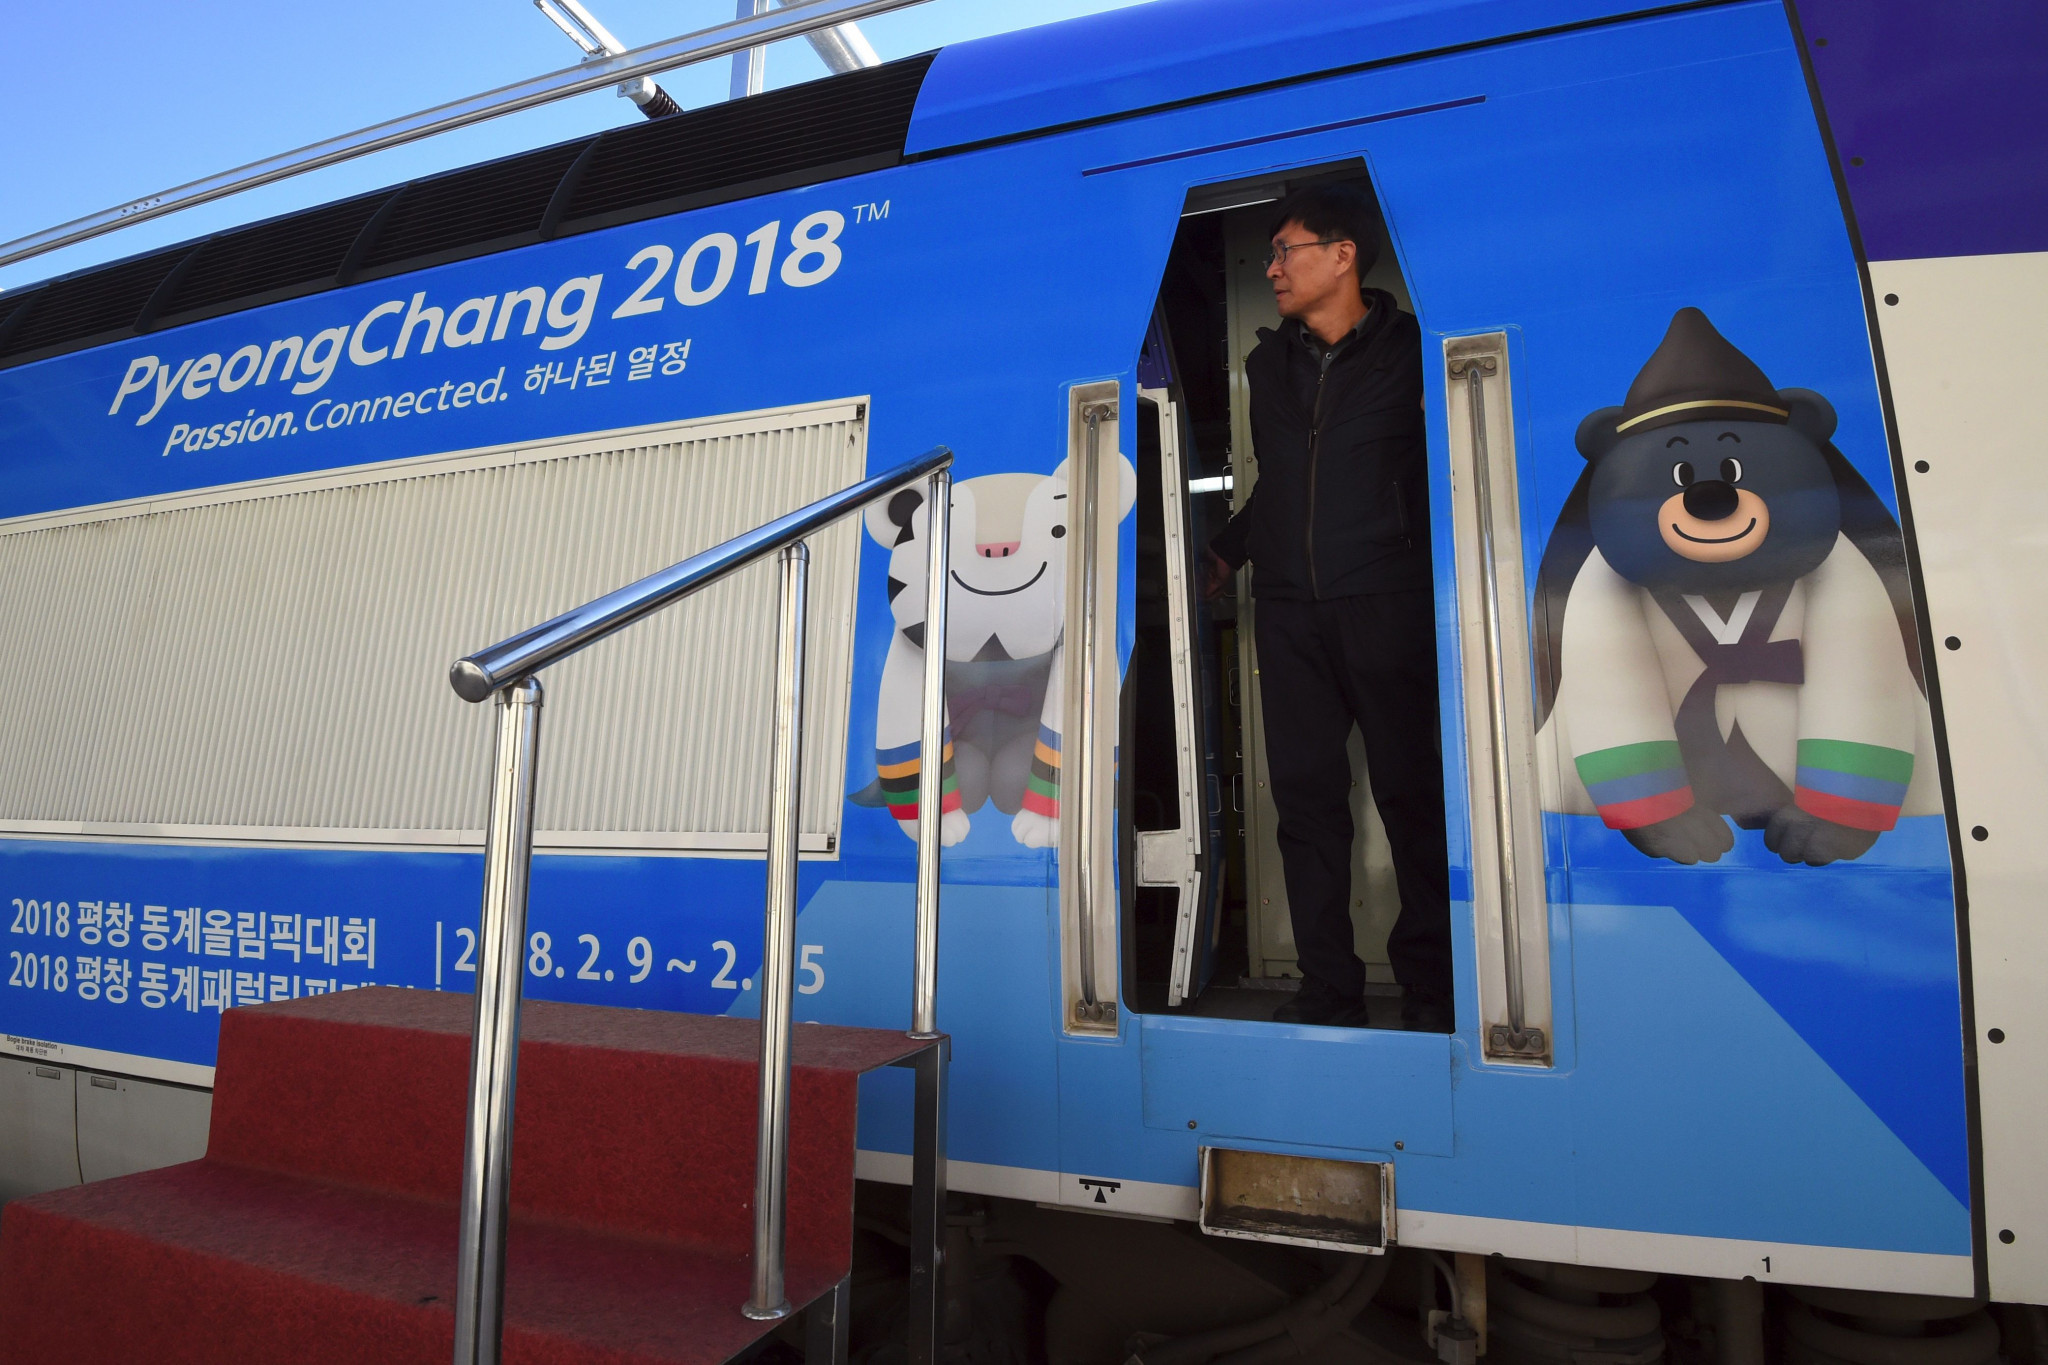 High-speed train for Pyeongchang 2018 opened to public